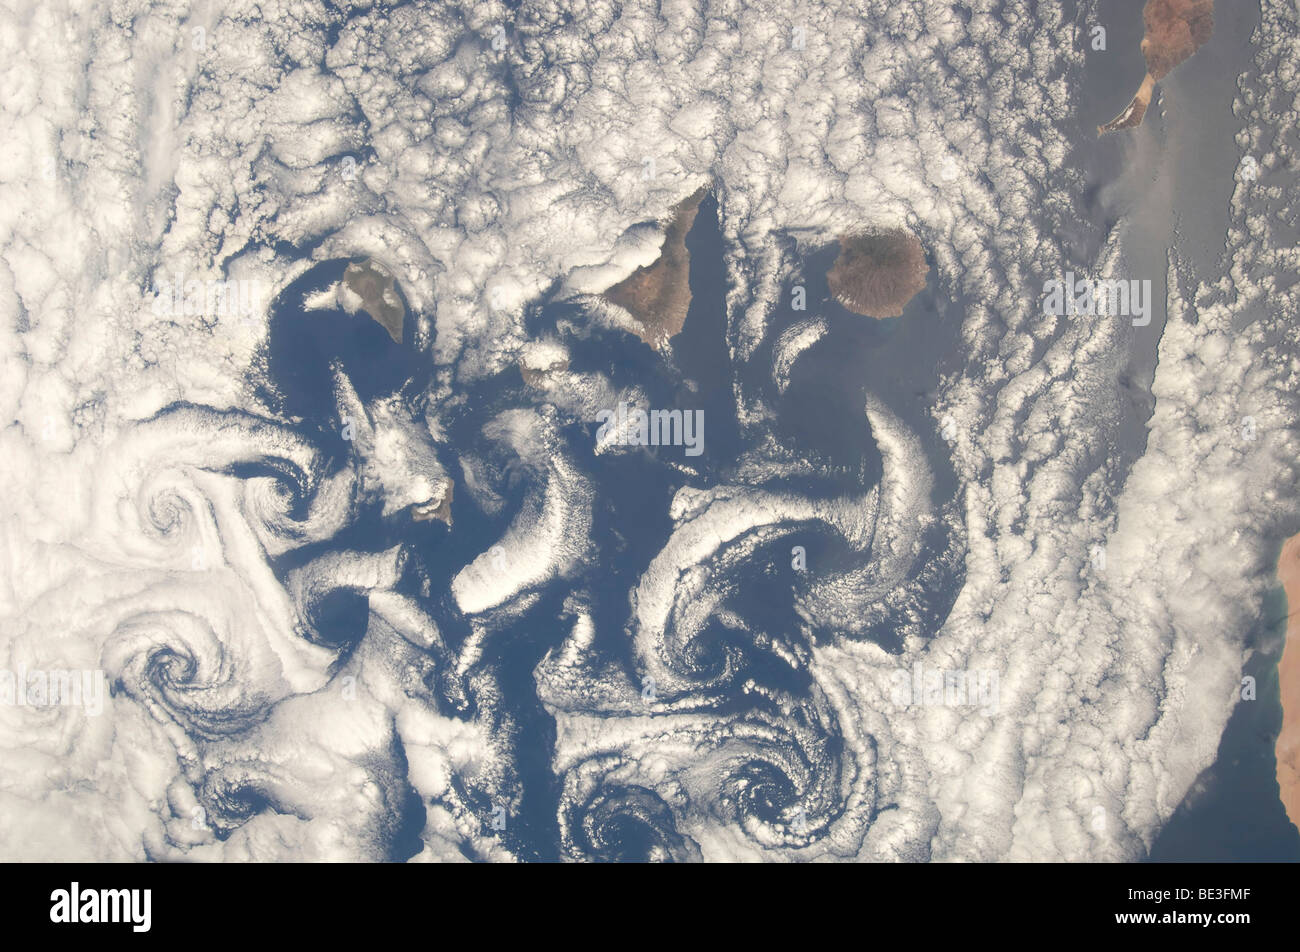 May 16, 2009 - A nadir view of cloud vortices in the area of the Canary Islands in the North Atlantic Ocean. Stock Photo